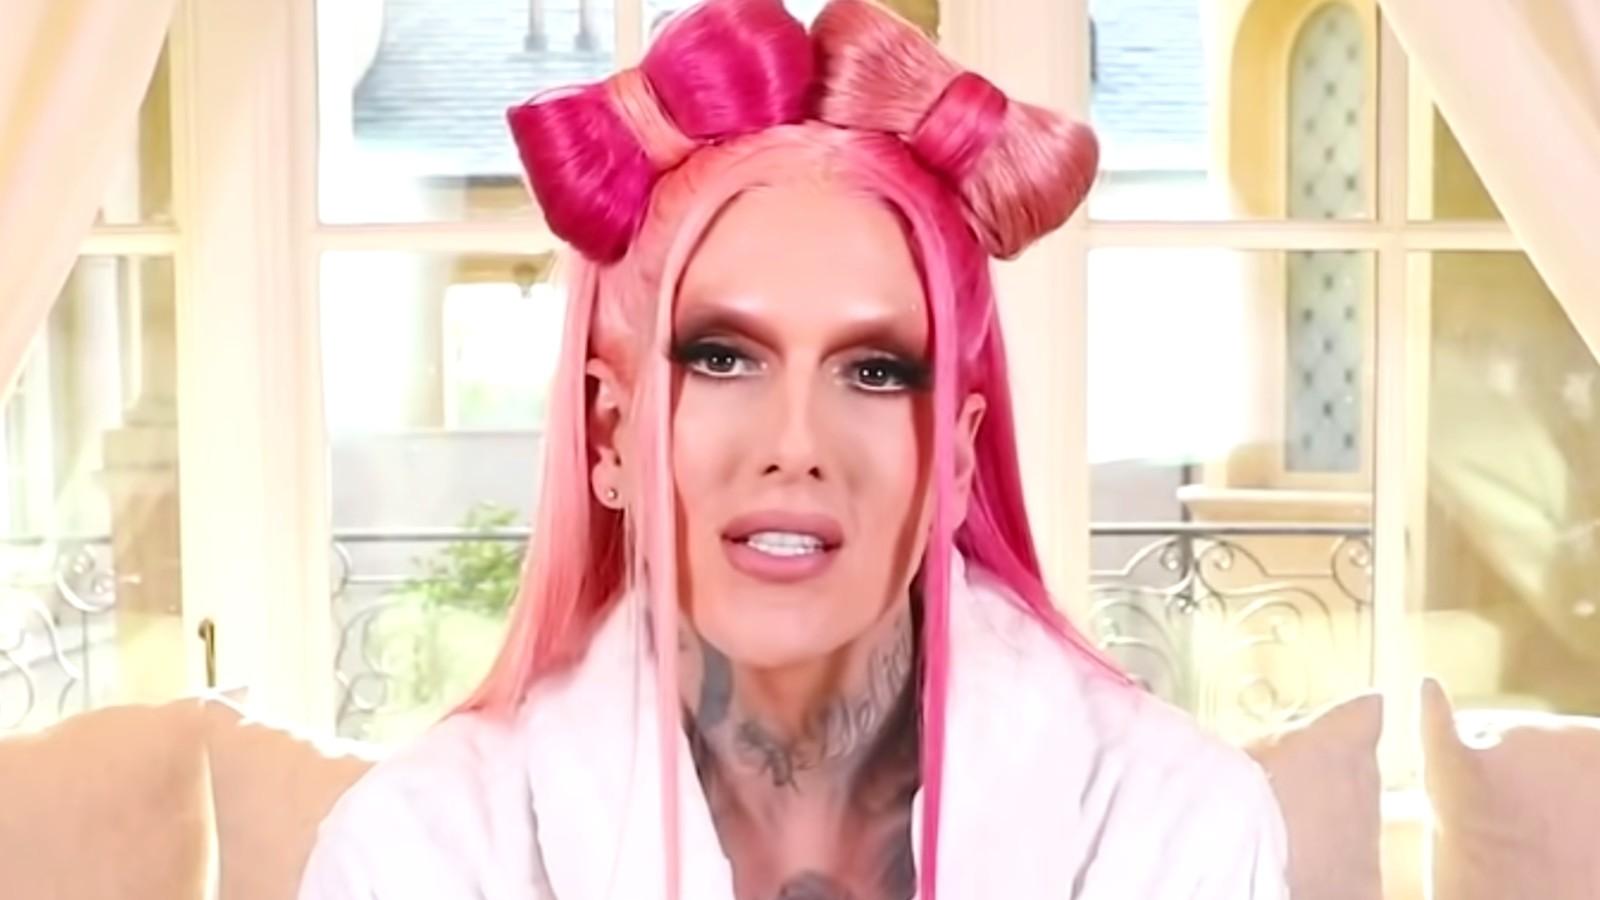 Jeffree Star filming a YouTube video